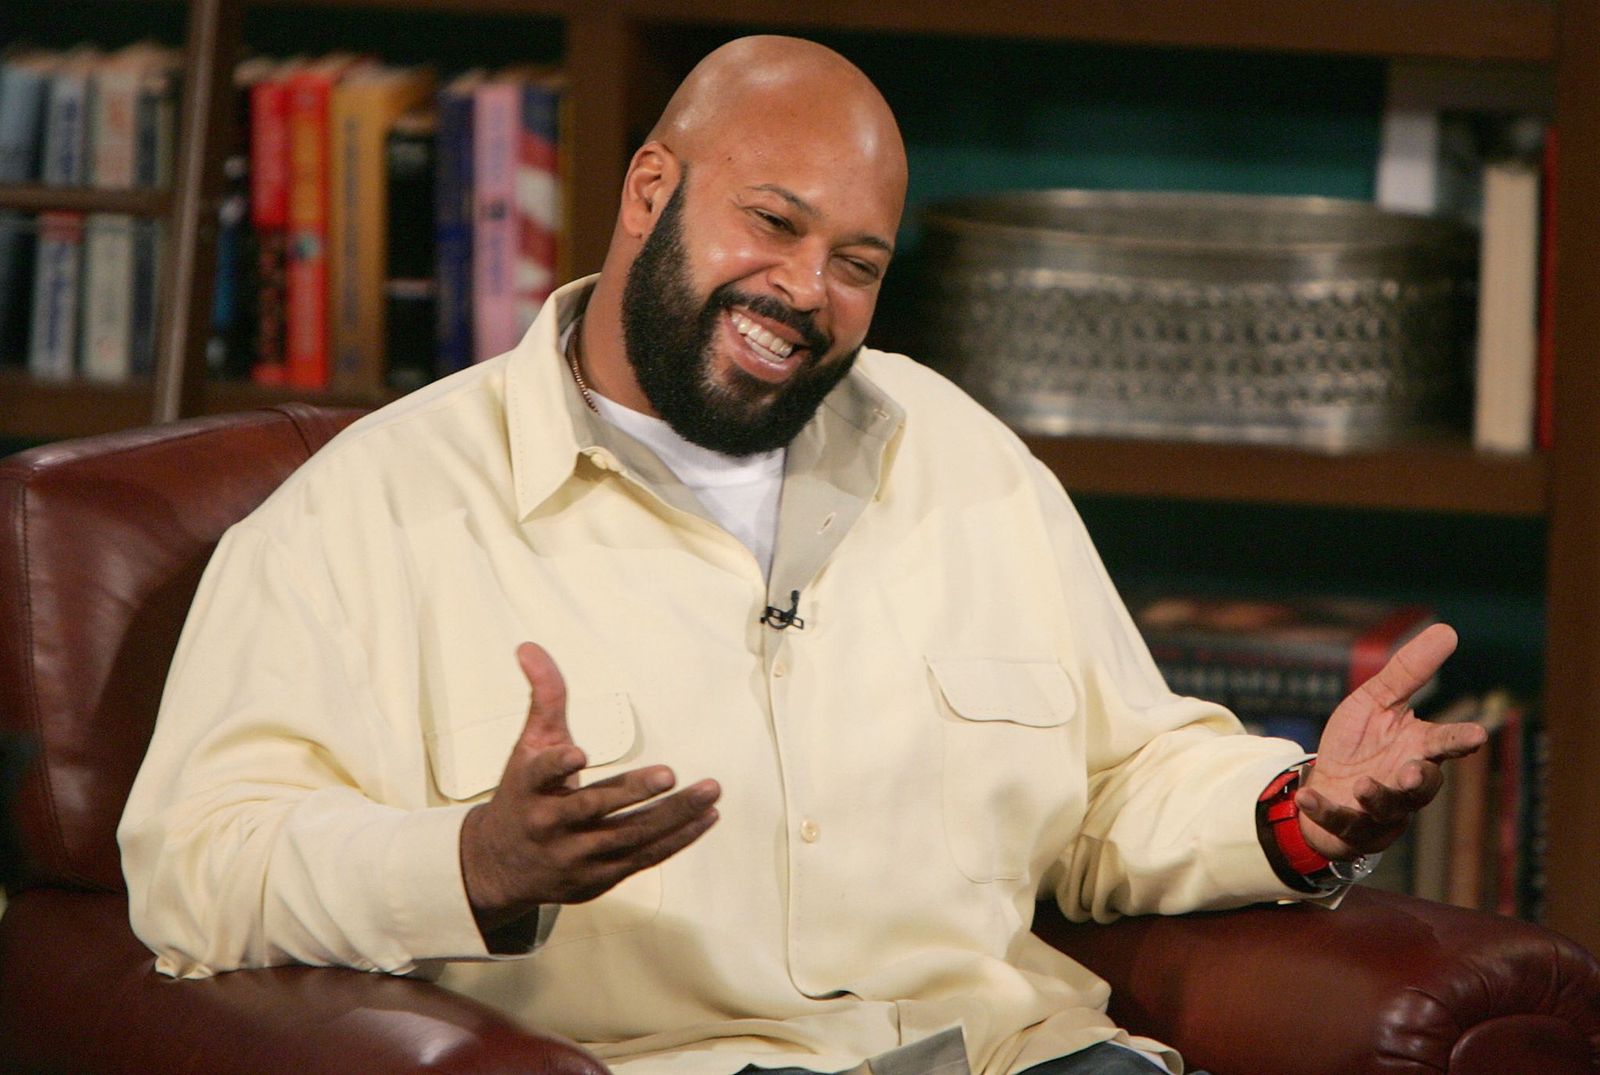 Suge Knight appears at CBS Studios for a taping of "The Late Late Show" on November 18, 2004 in Los Angeles, California. | Photo: Getty Images